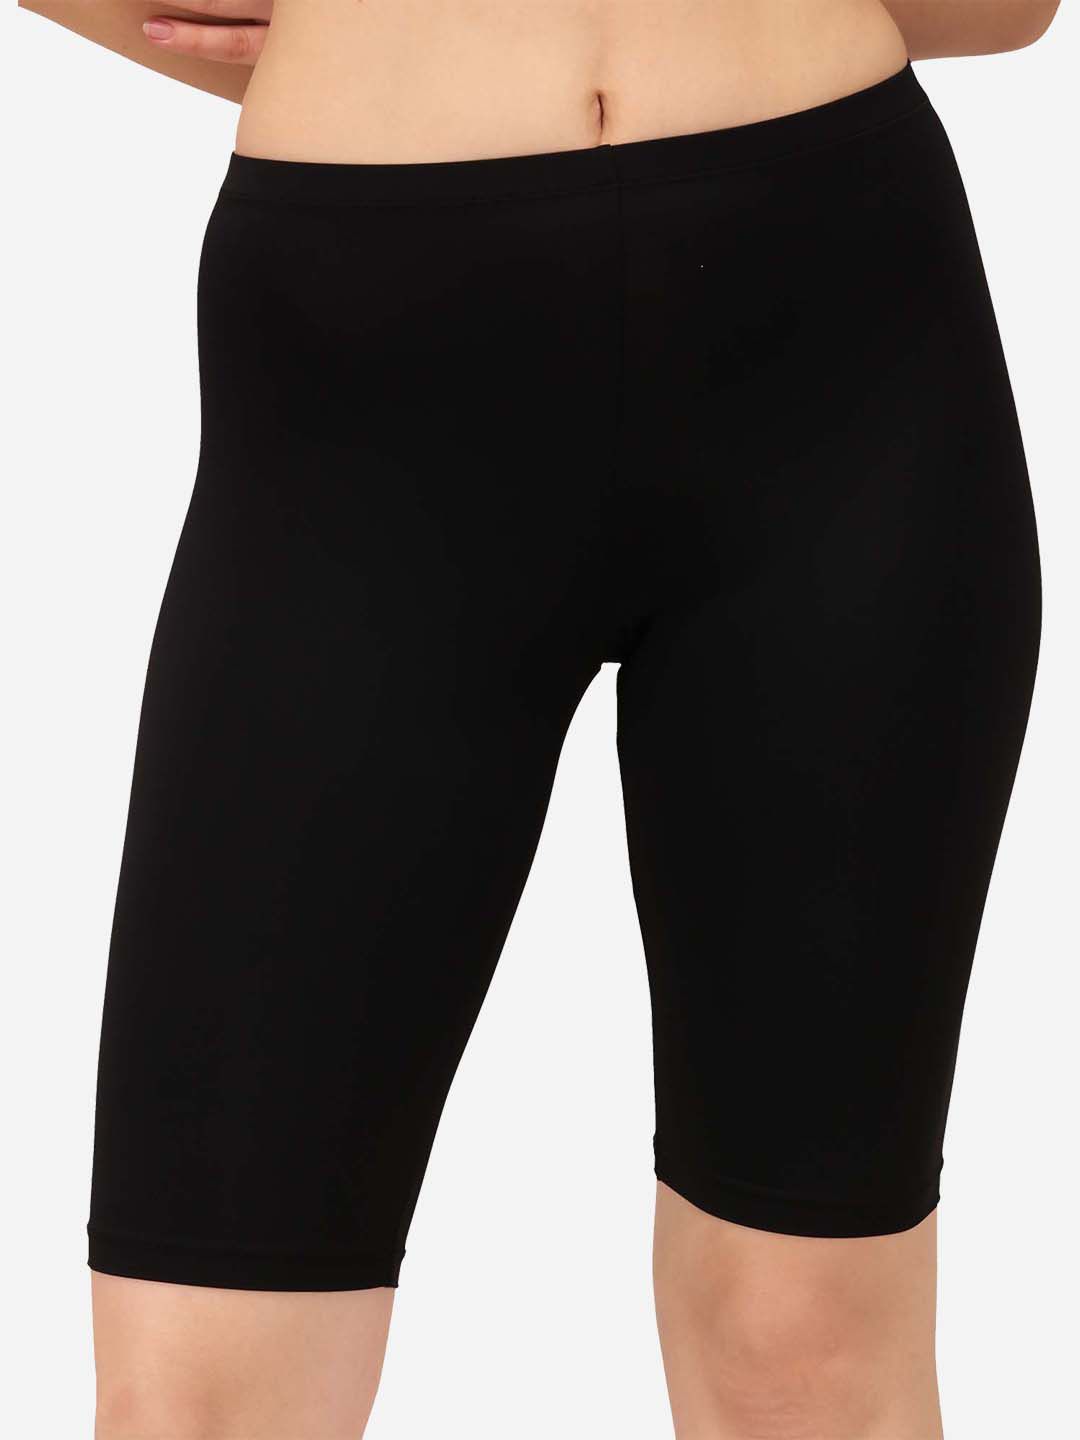 Soie Women Black Skinny Fit Cycling Sports Shorts Price in India